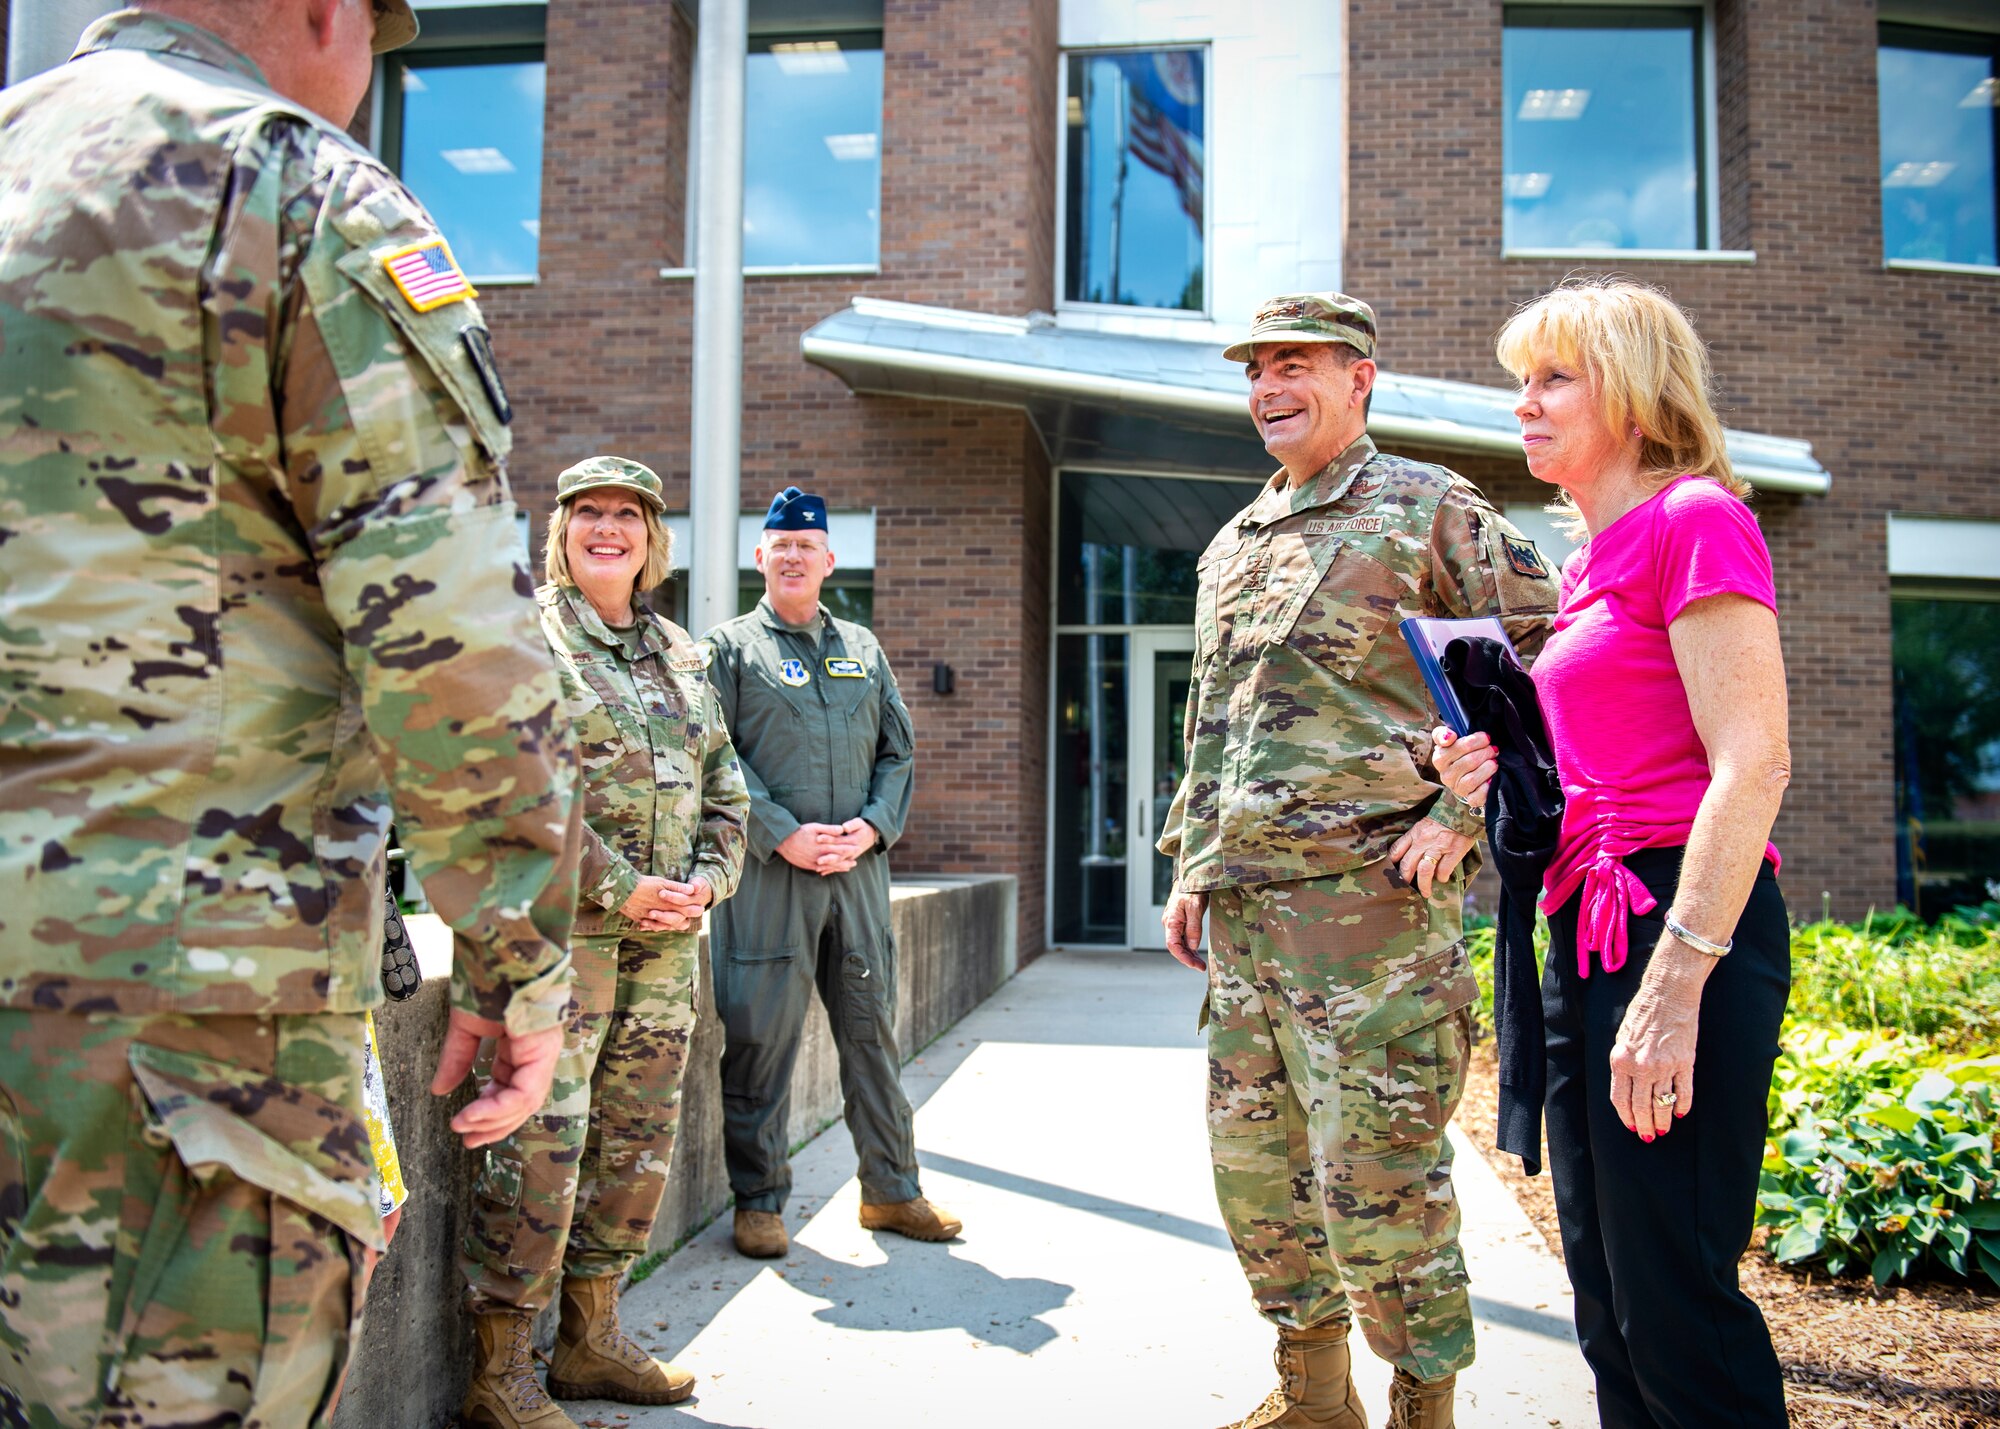 U.S. Air Force Lt. Gen. Michael A. Loh, Director of the Air National Guard, is greeted by senior leaders from the 133rd Airlift Wing and the Minnesota National Guard in St. Paul, Minn., July 16, 2021.